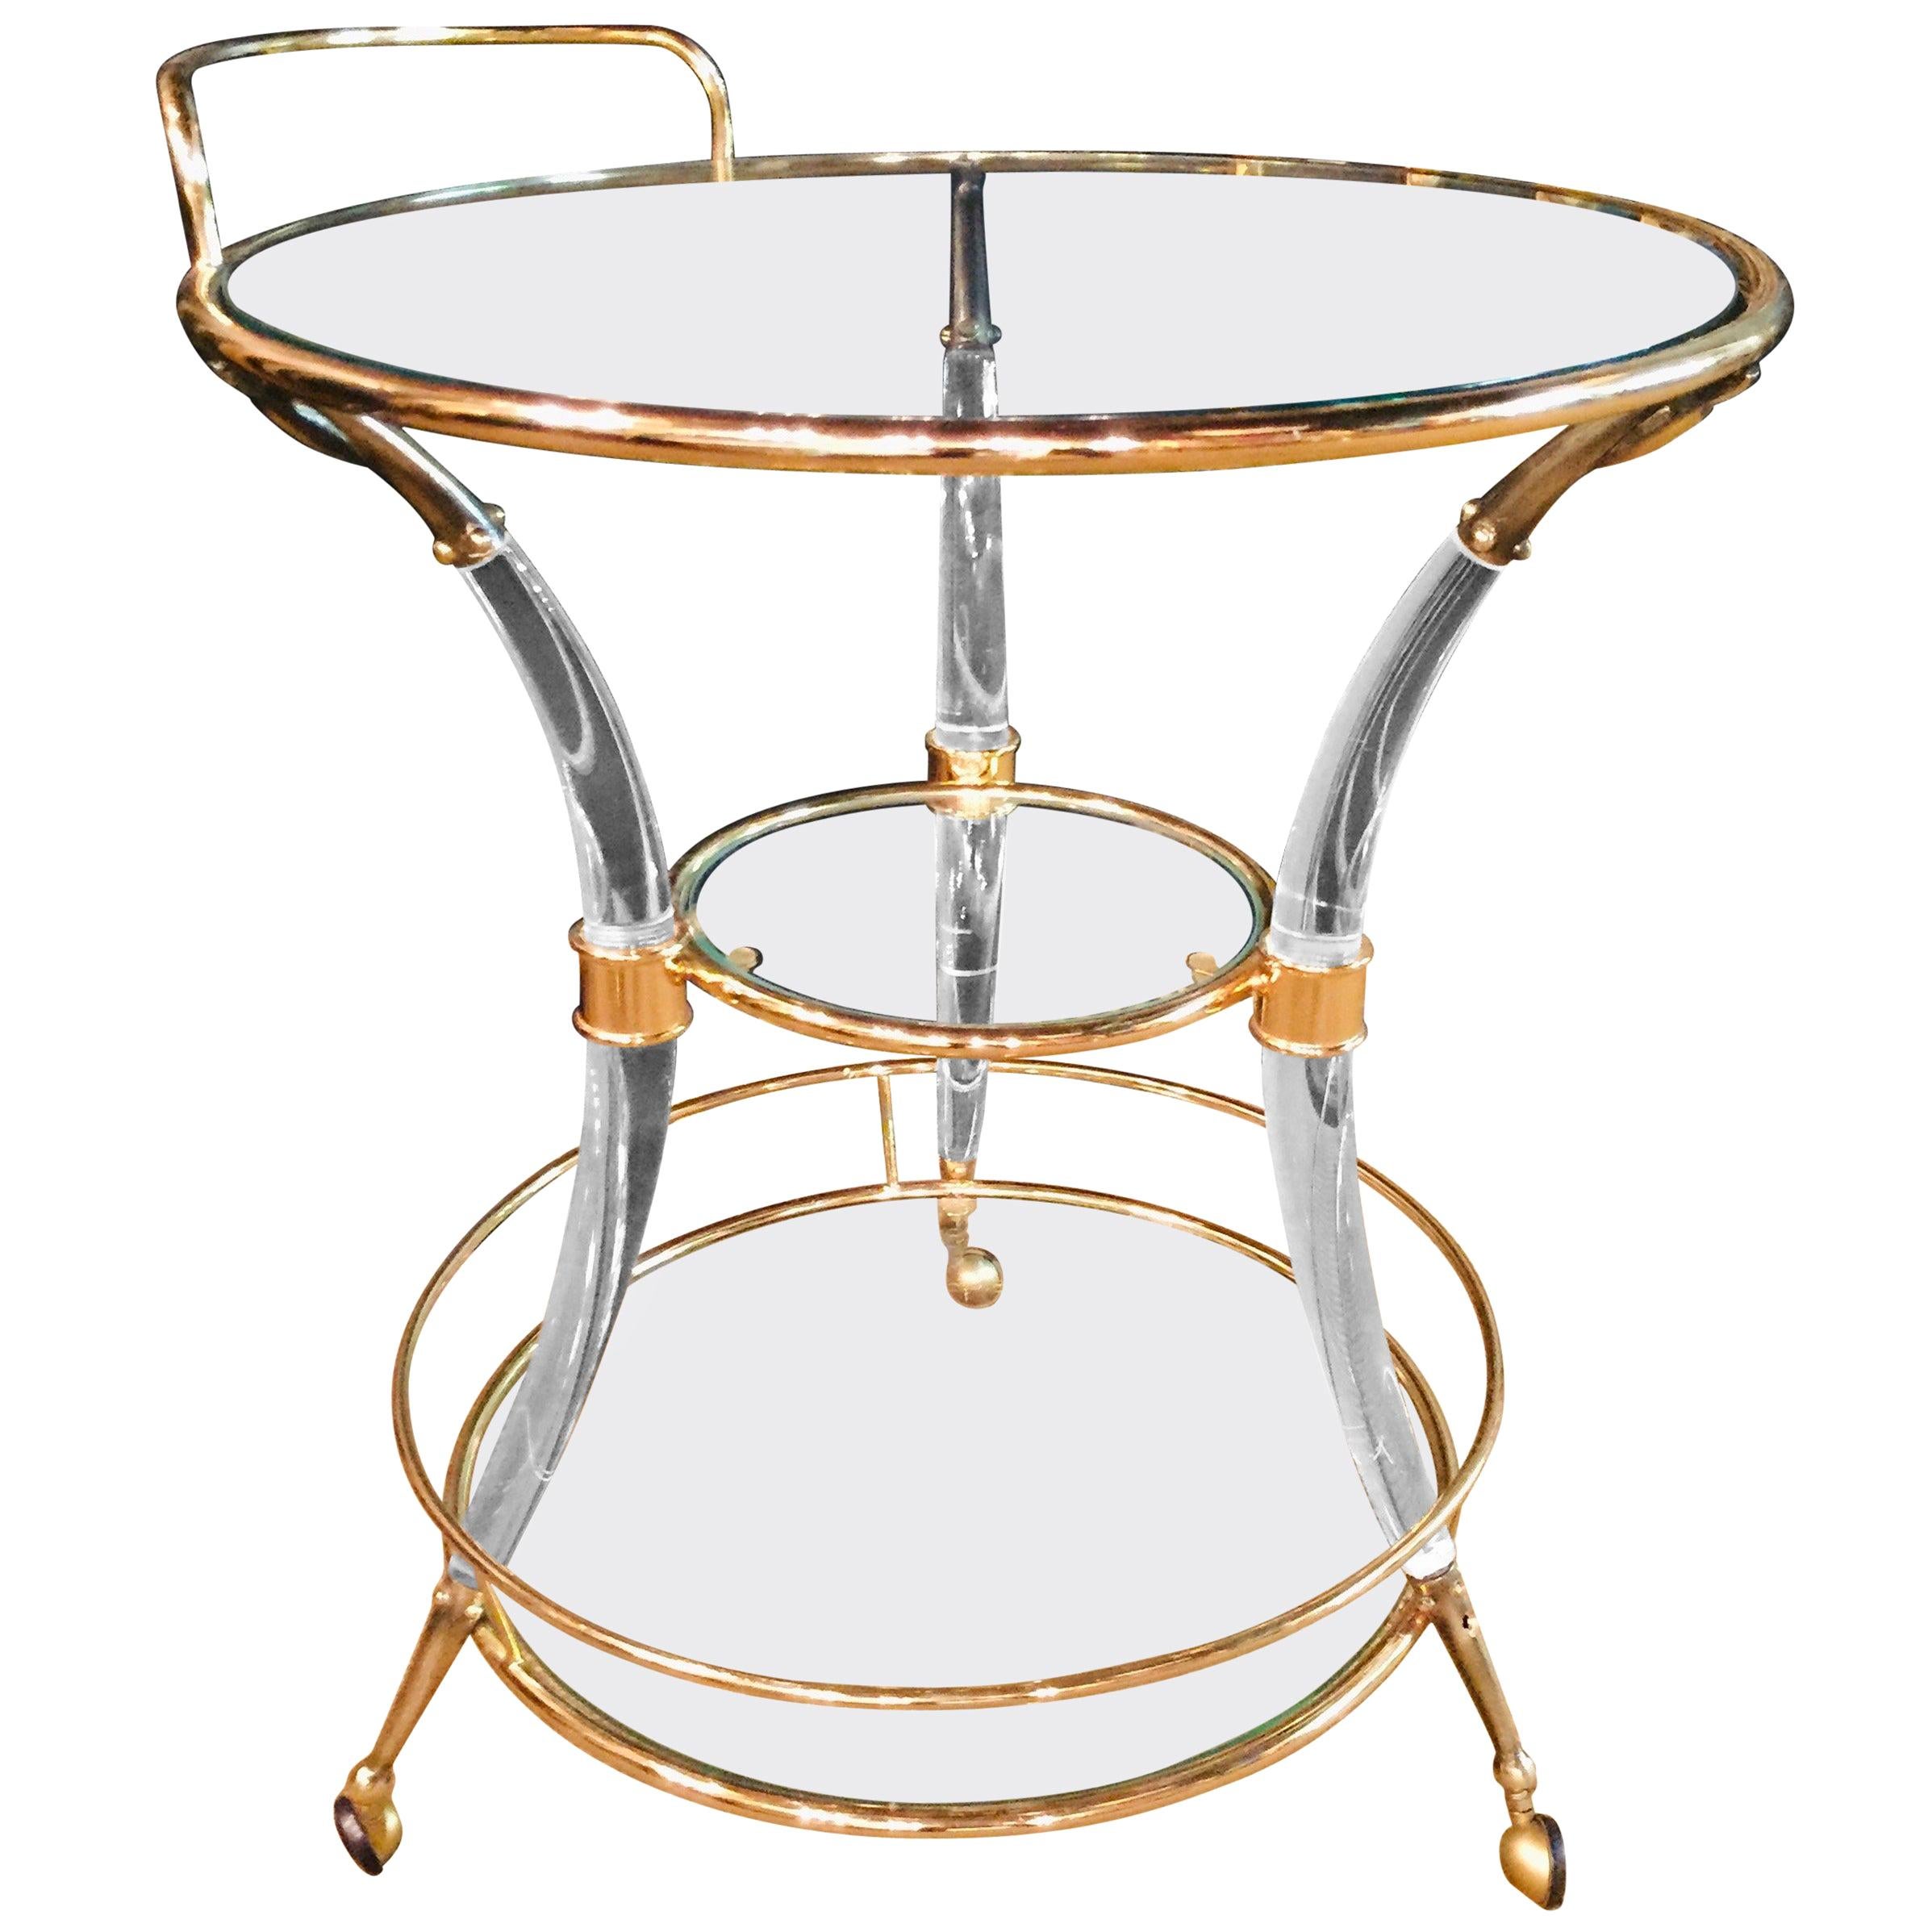 Exclusive Tea Table Acrylic Curved Legs with Brass